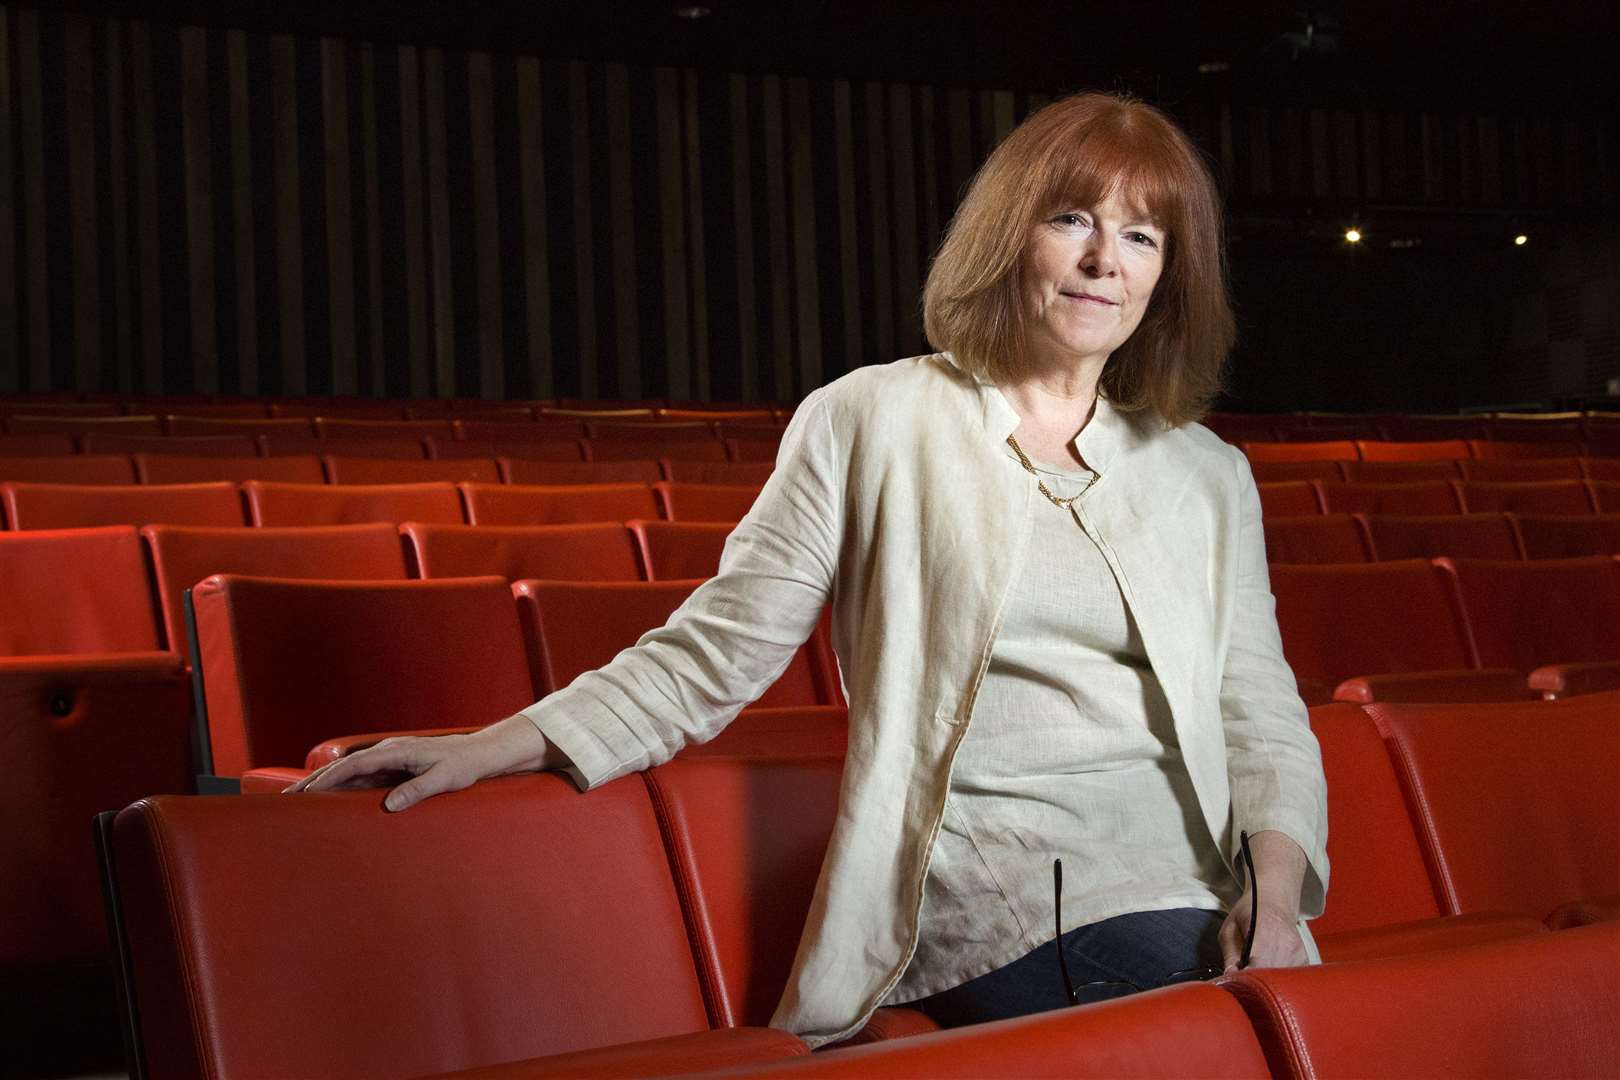 Deborah Shaw, chief executive of the Marlowe, is excited to reopen